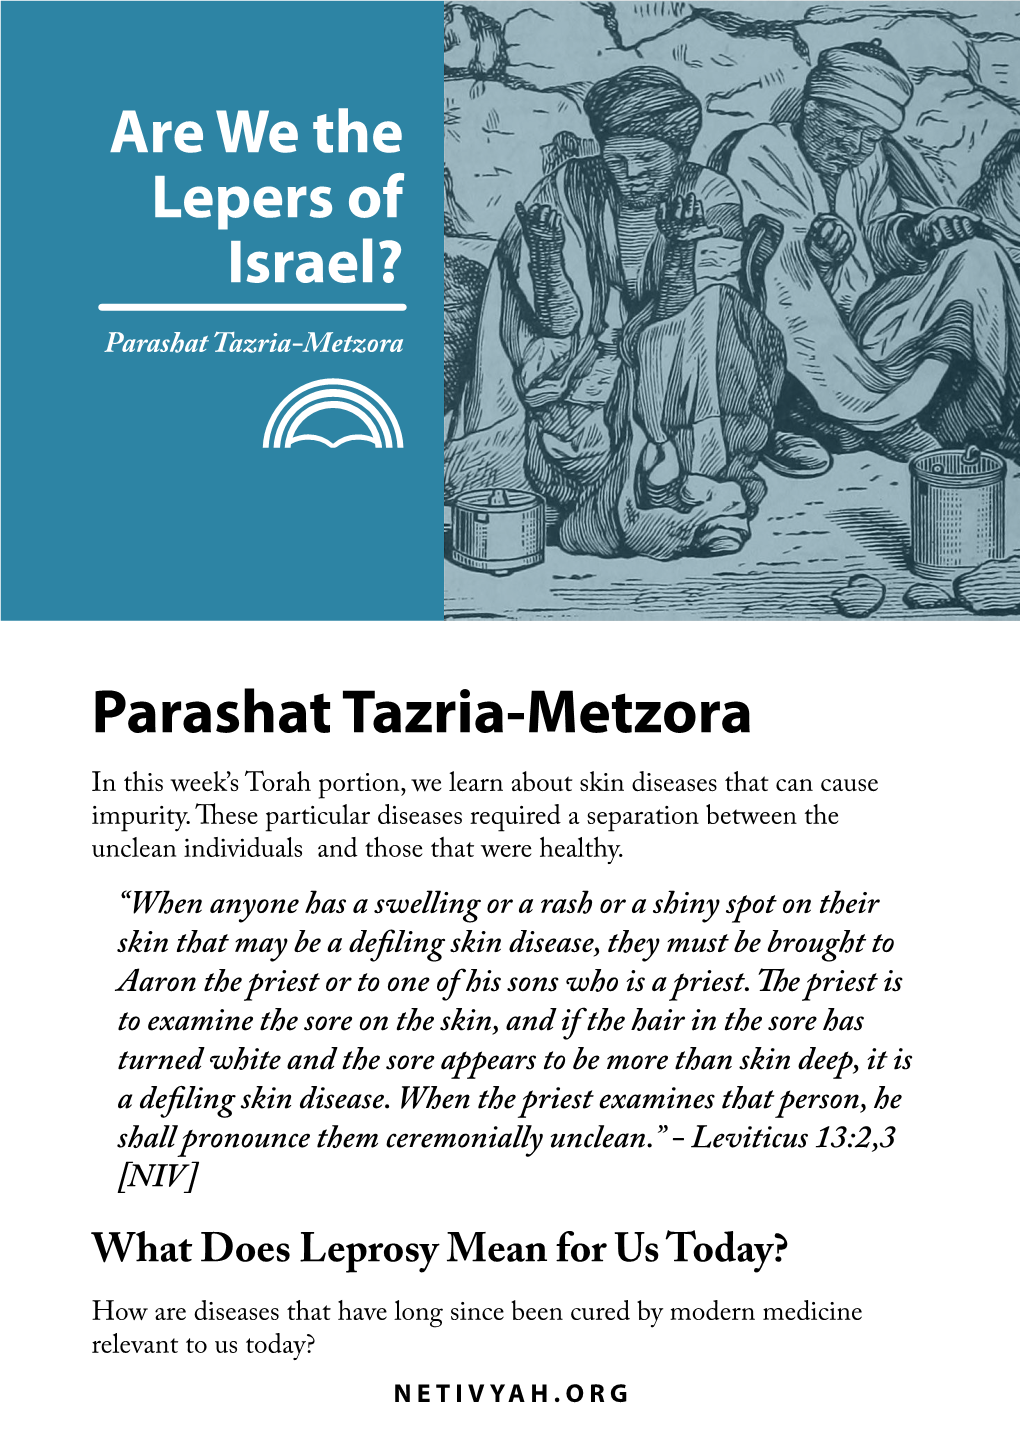 Parashat Tazria-Metzora 15:11 [NIV] E Lepers’ Test Diseases That Appear in Our Reading